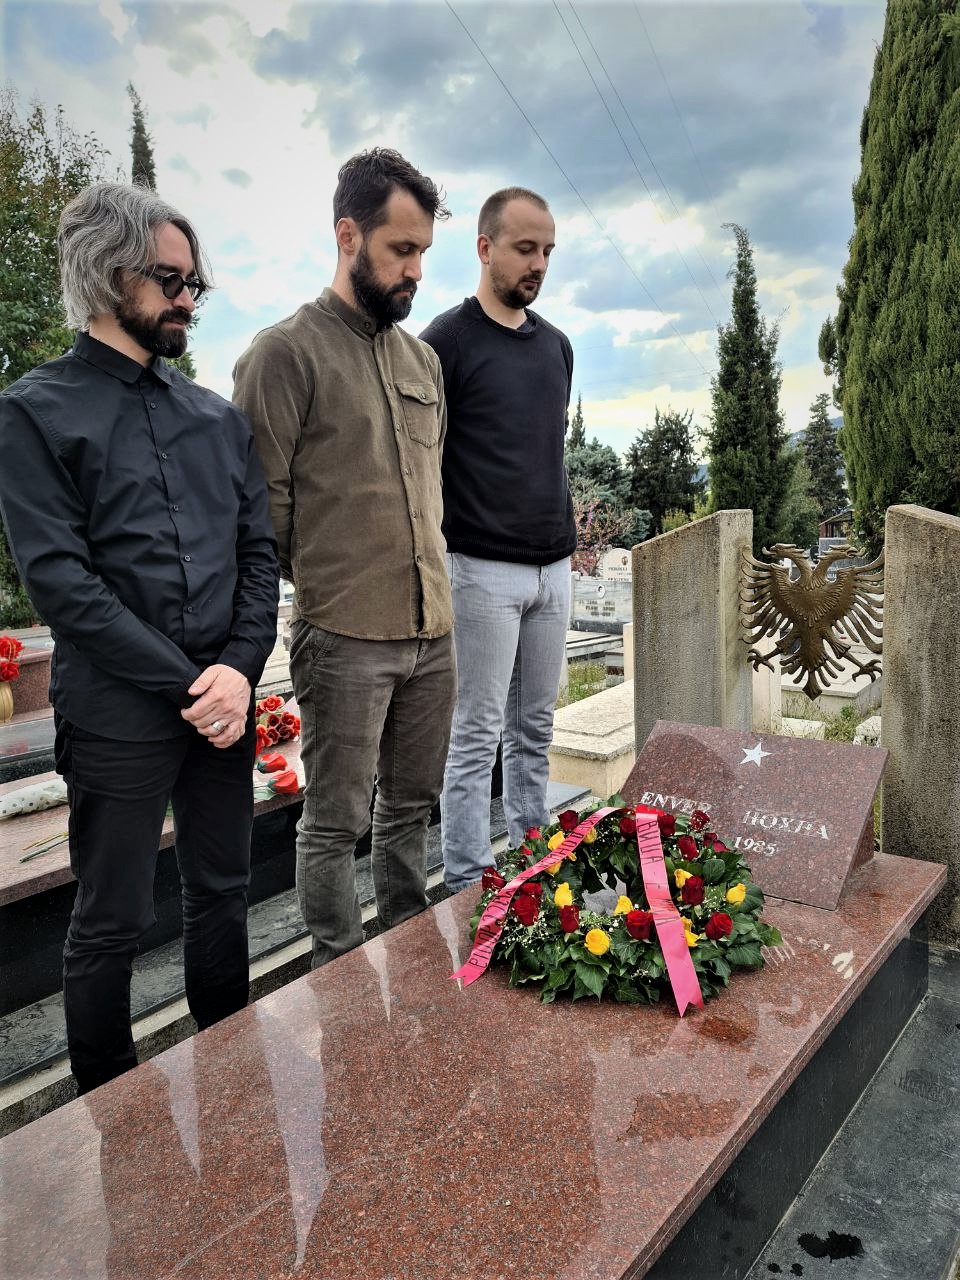 Levica leader Apasiev bowed on the grave of Albanian dictator Enver Hoxha